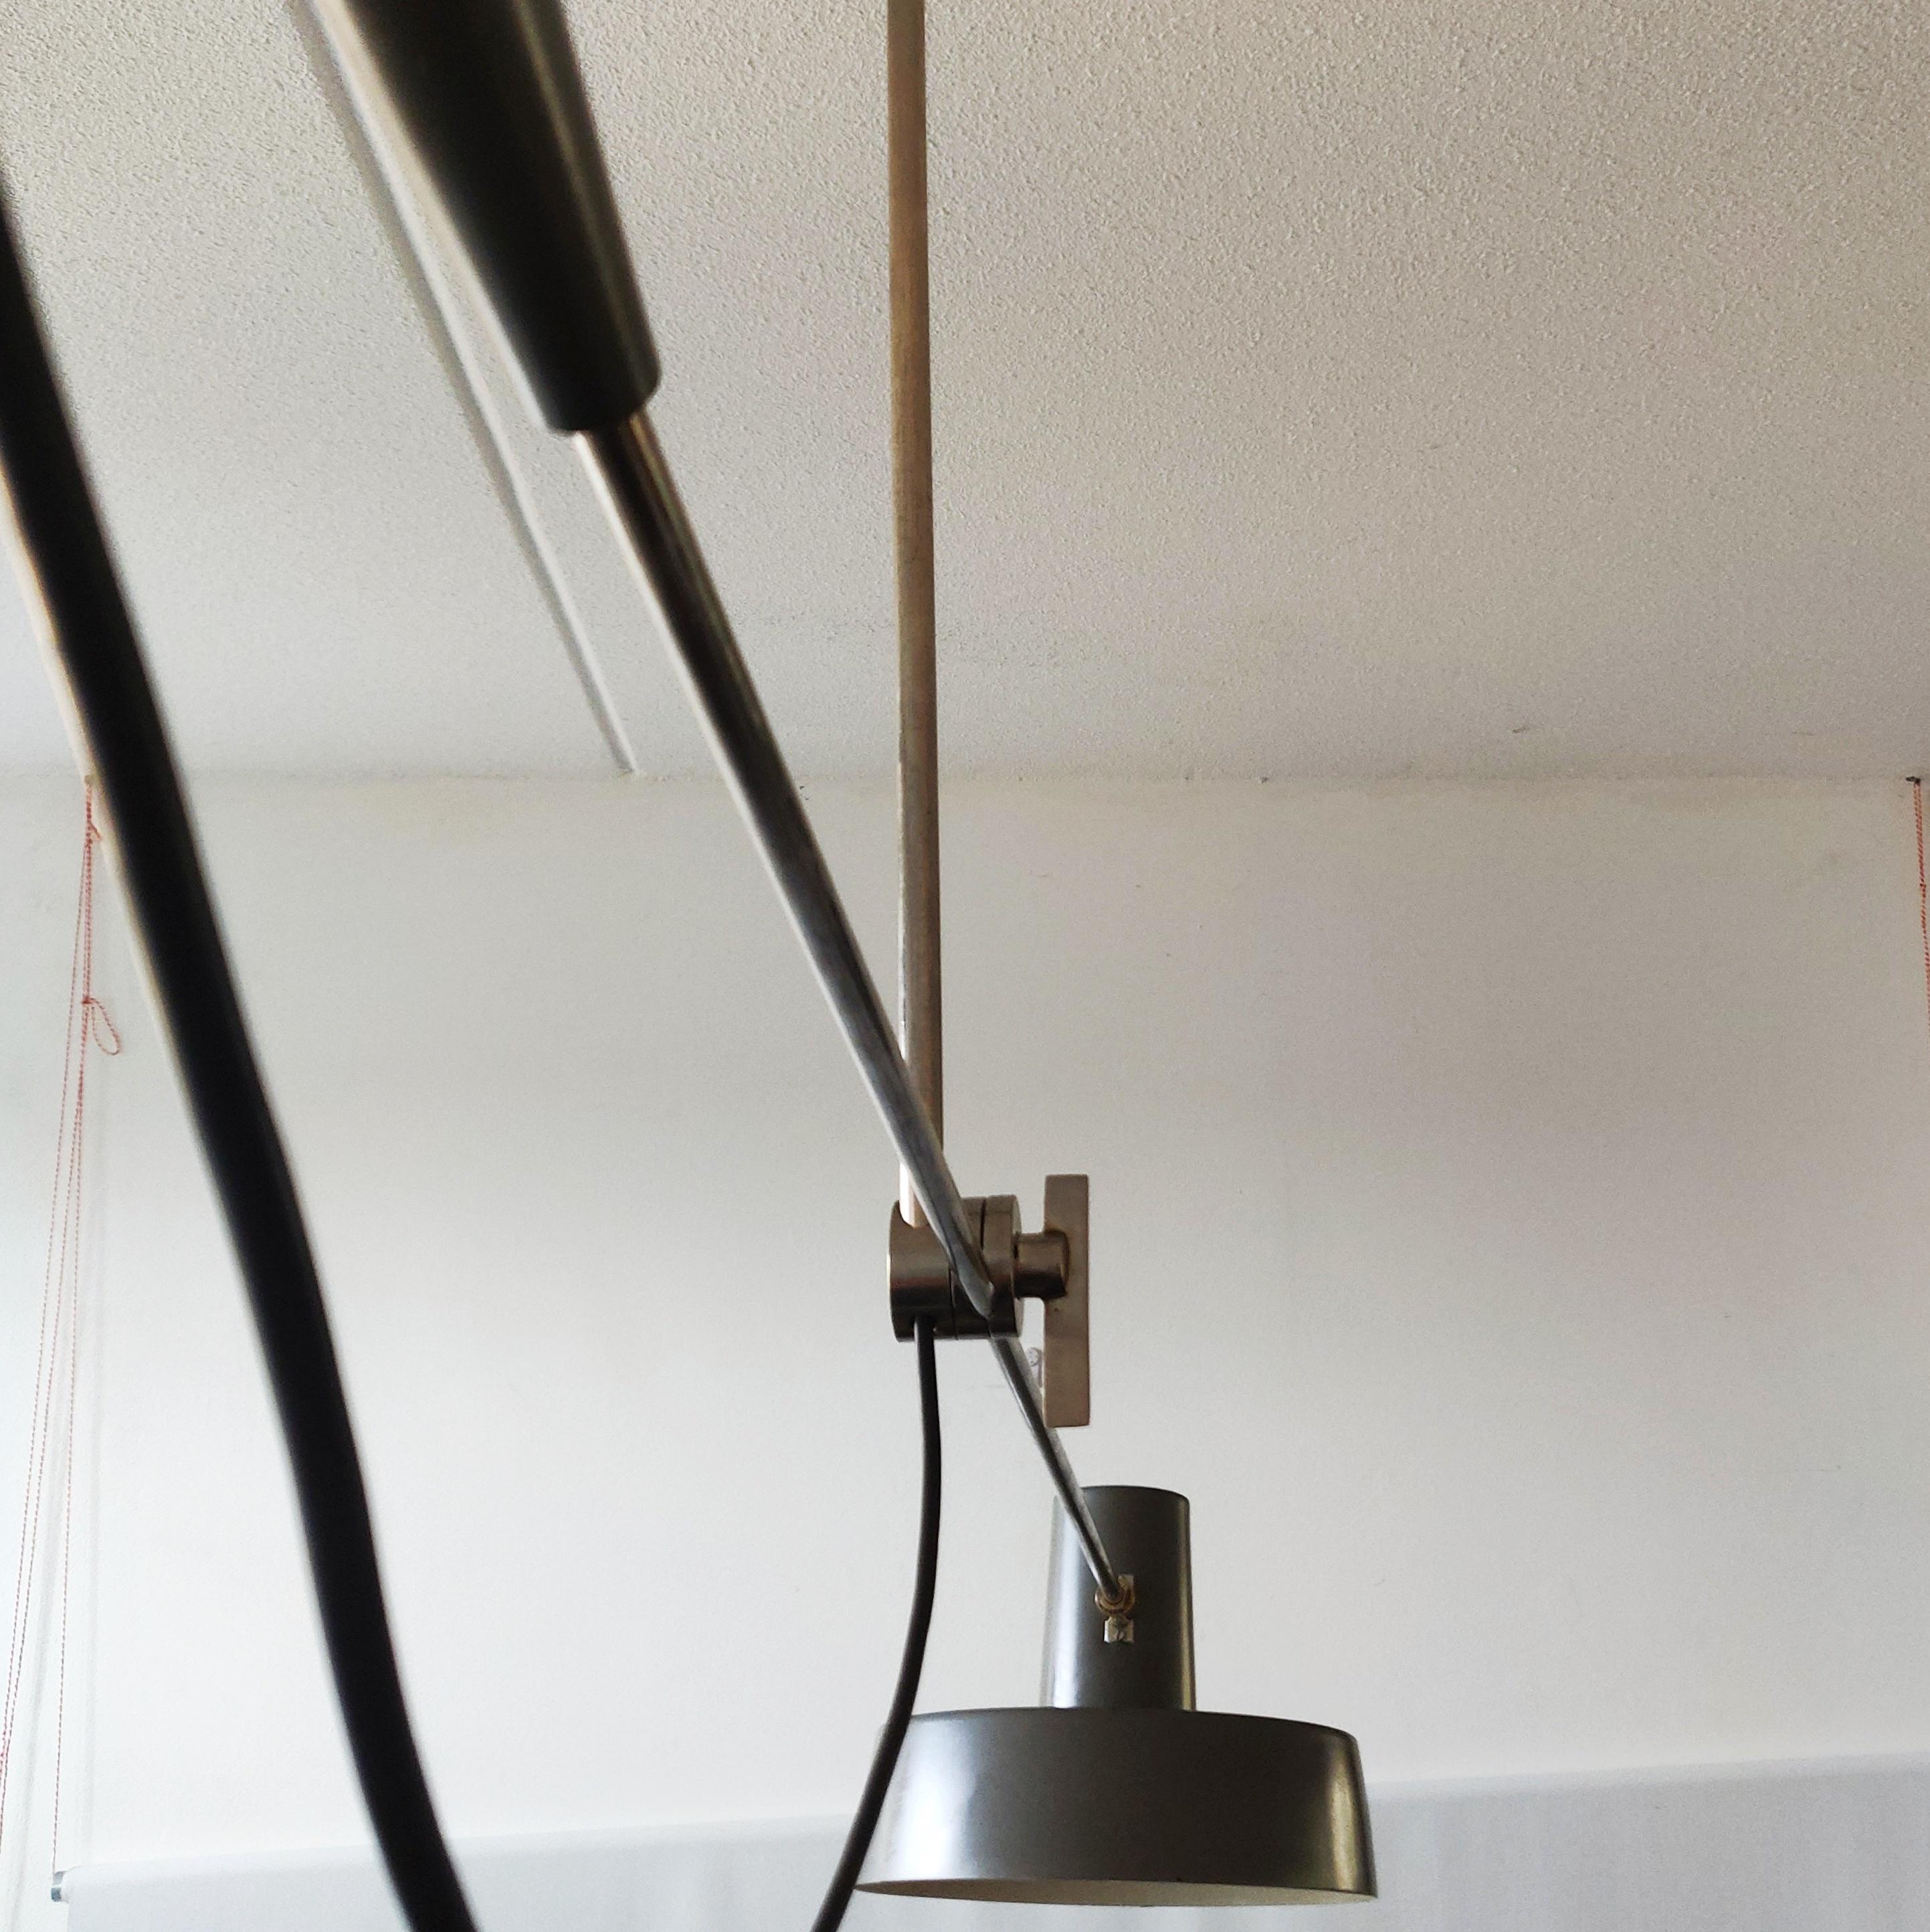 Mid-20th Century Dutch Ceiling Counter Balance Lamp by Willem Hagoort for Hagoort Lampen, 1960s For Sale